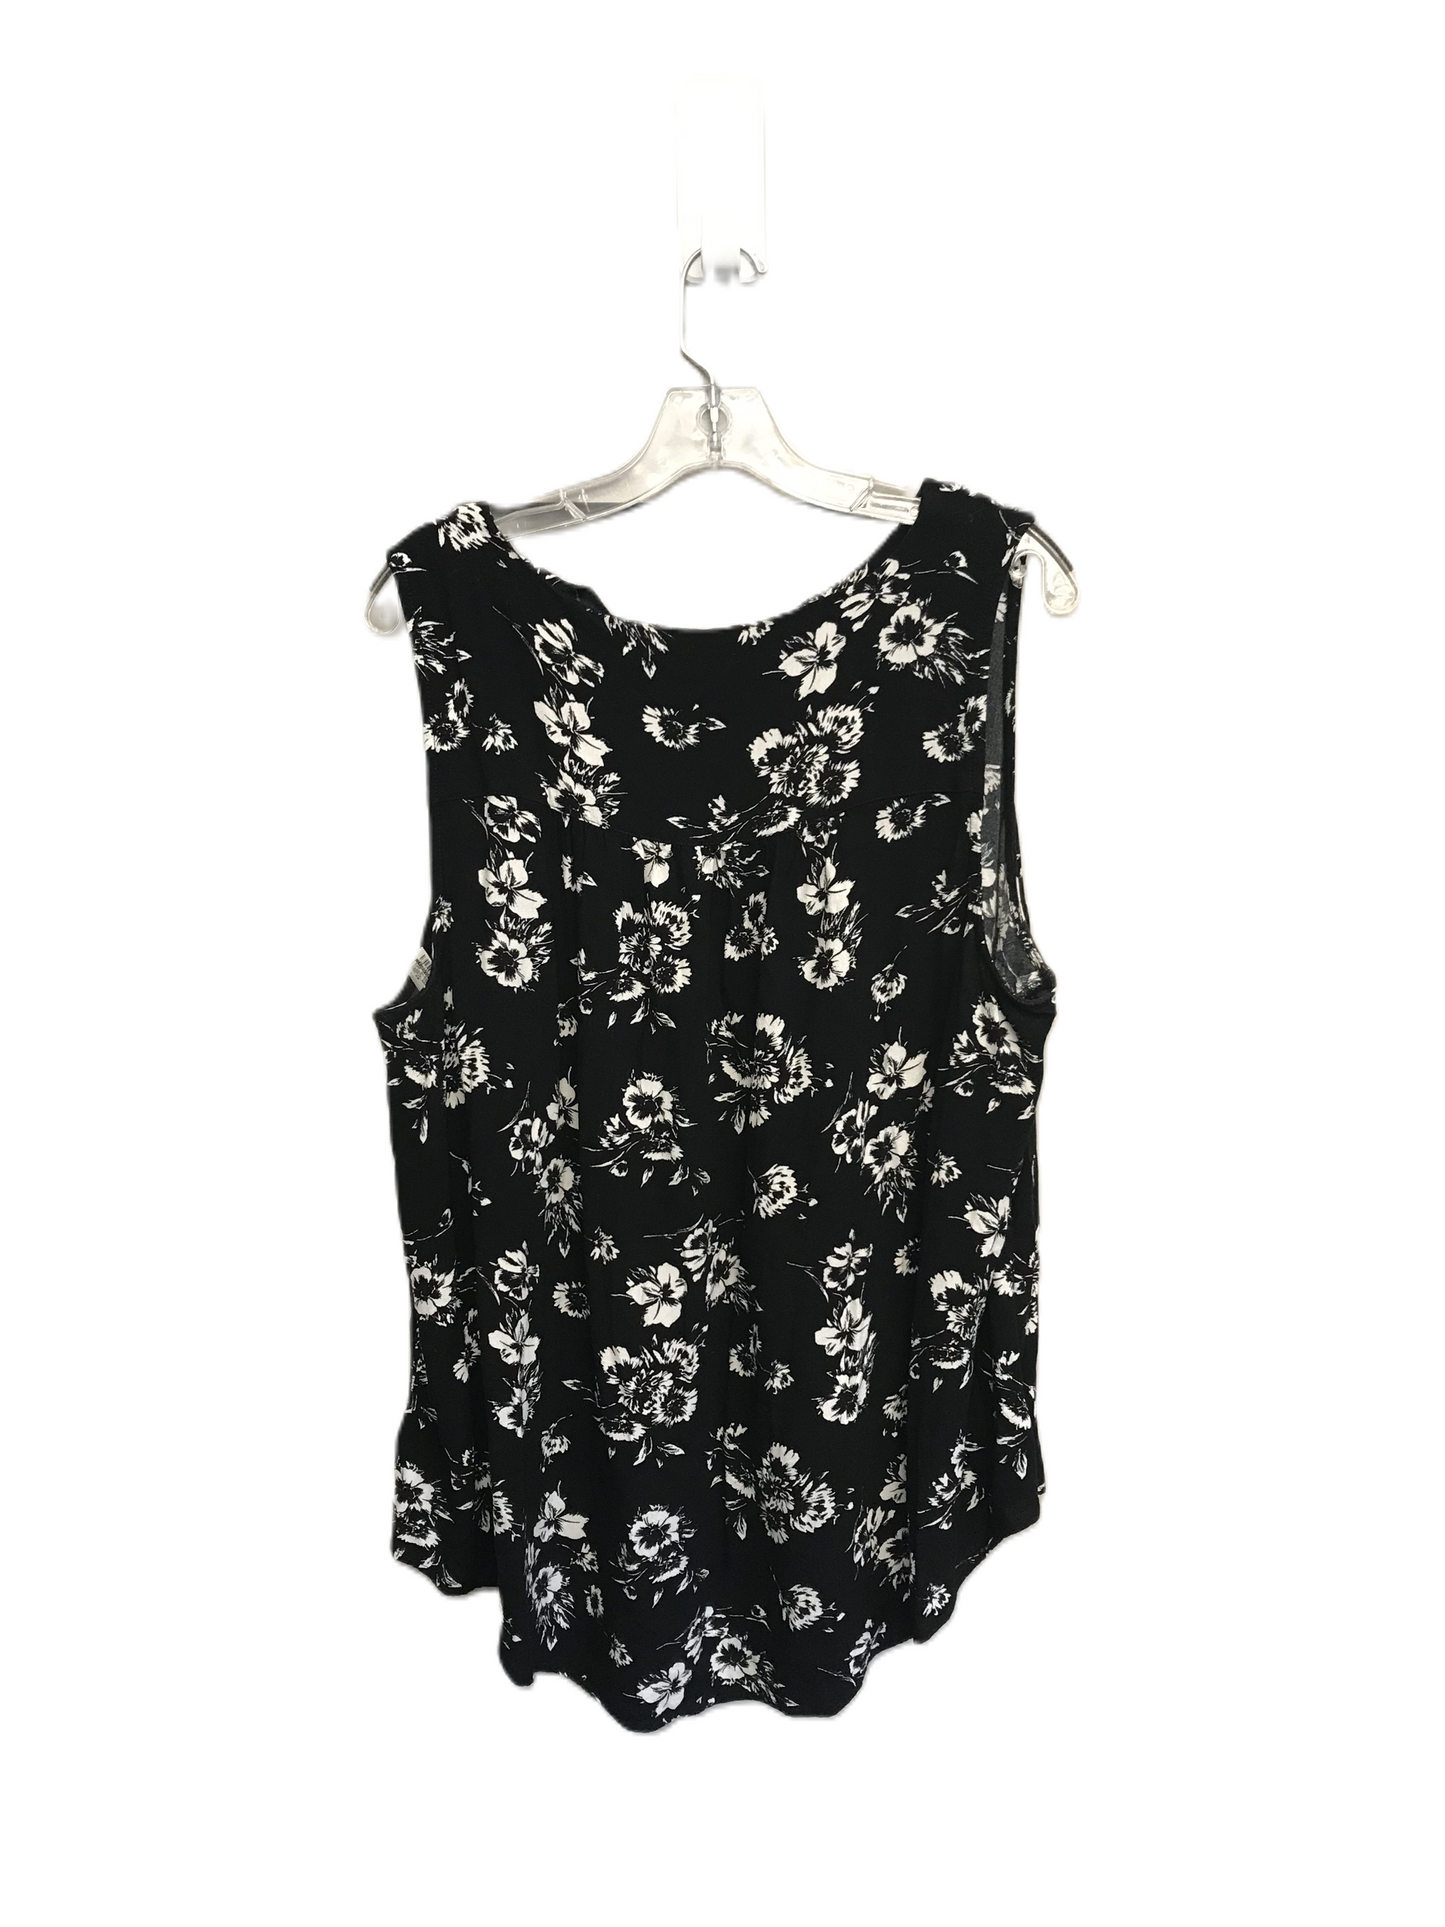 Floral Print Top Sleeveless By Torrid, Size: 2x